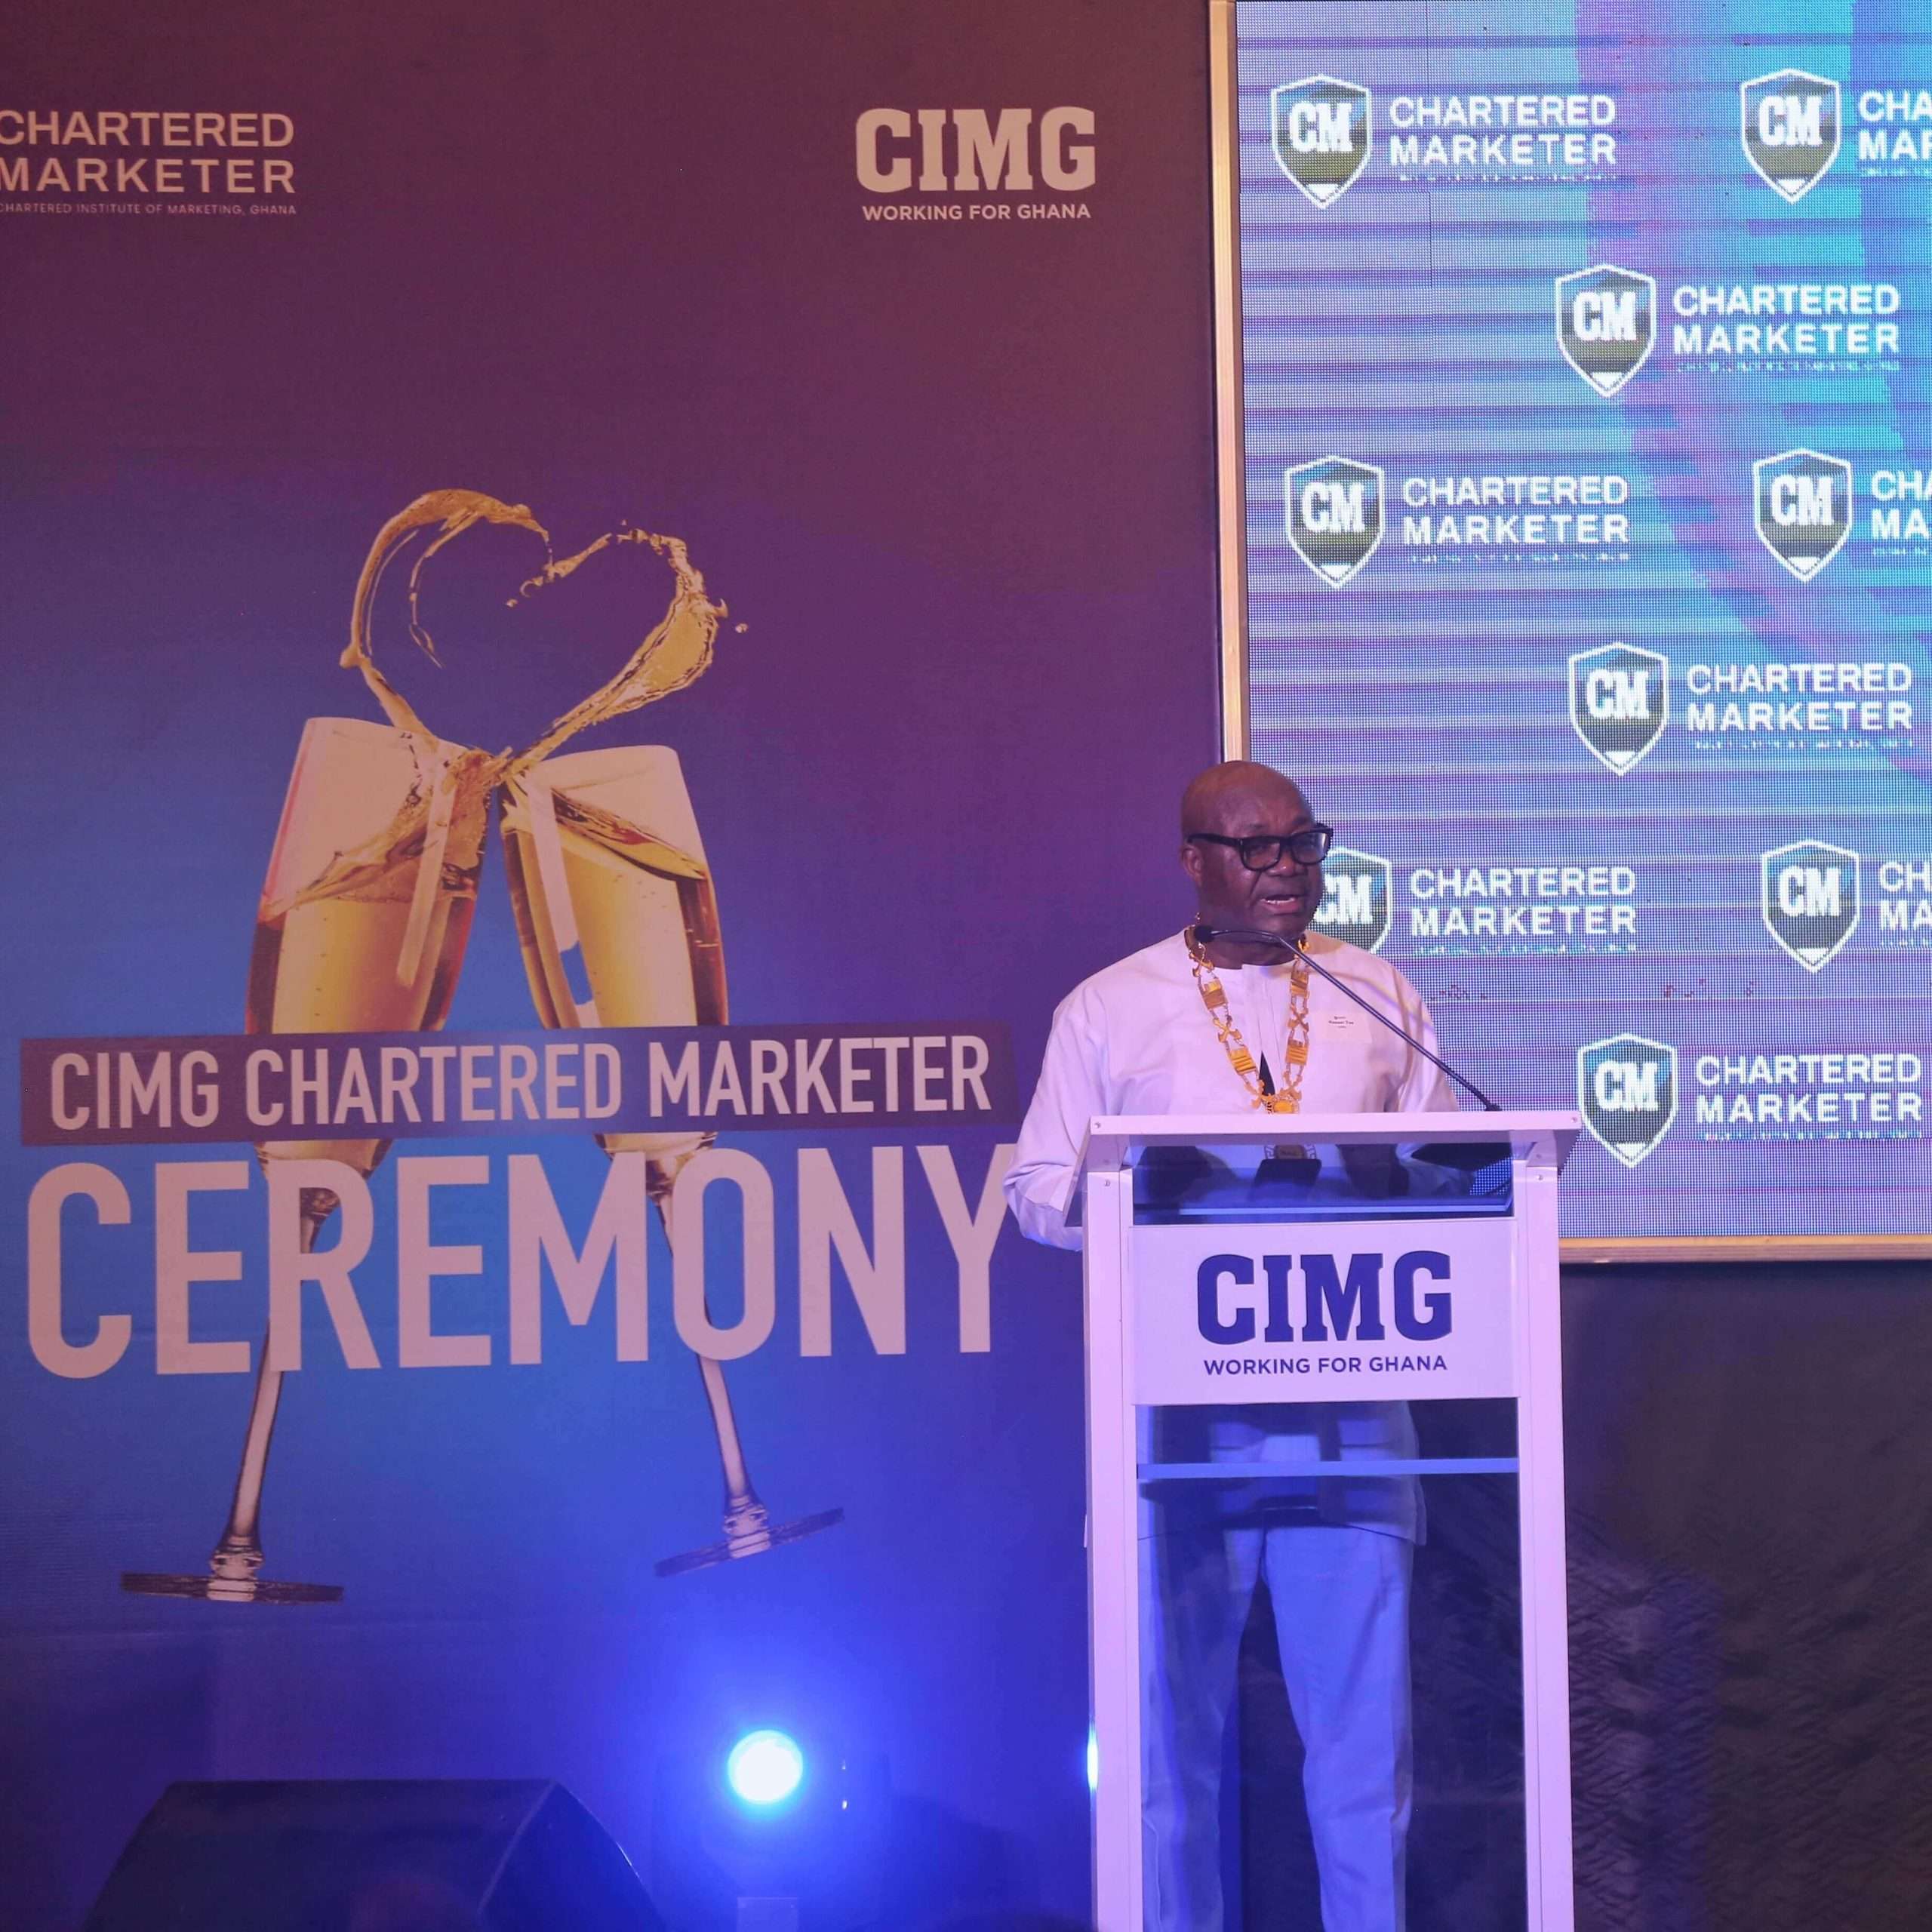 CIMG Introduces the Chartered Marketer Brand in Ghana